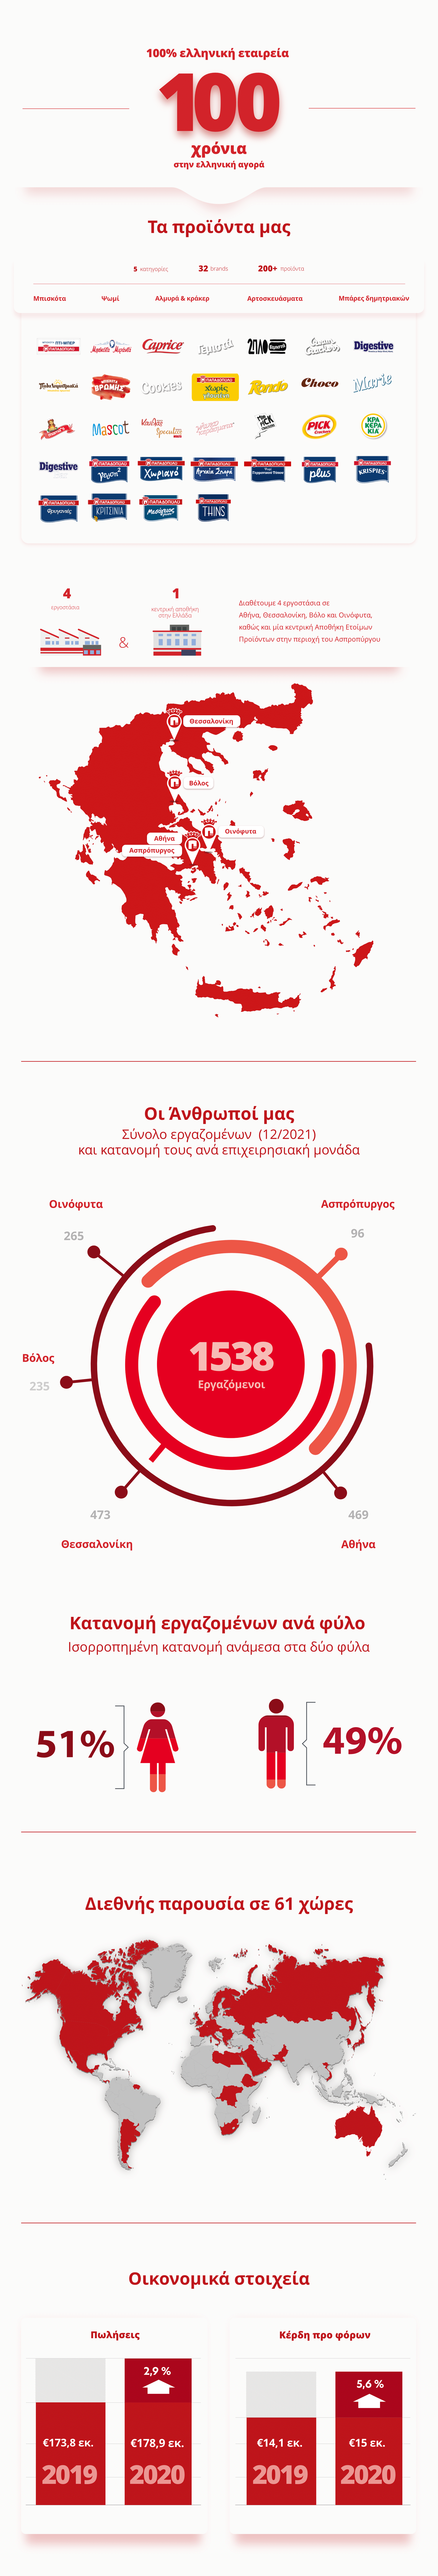 Main Infographic Image for papadopoulou